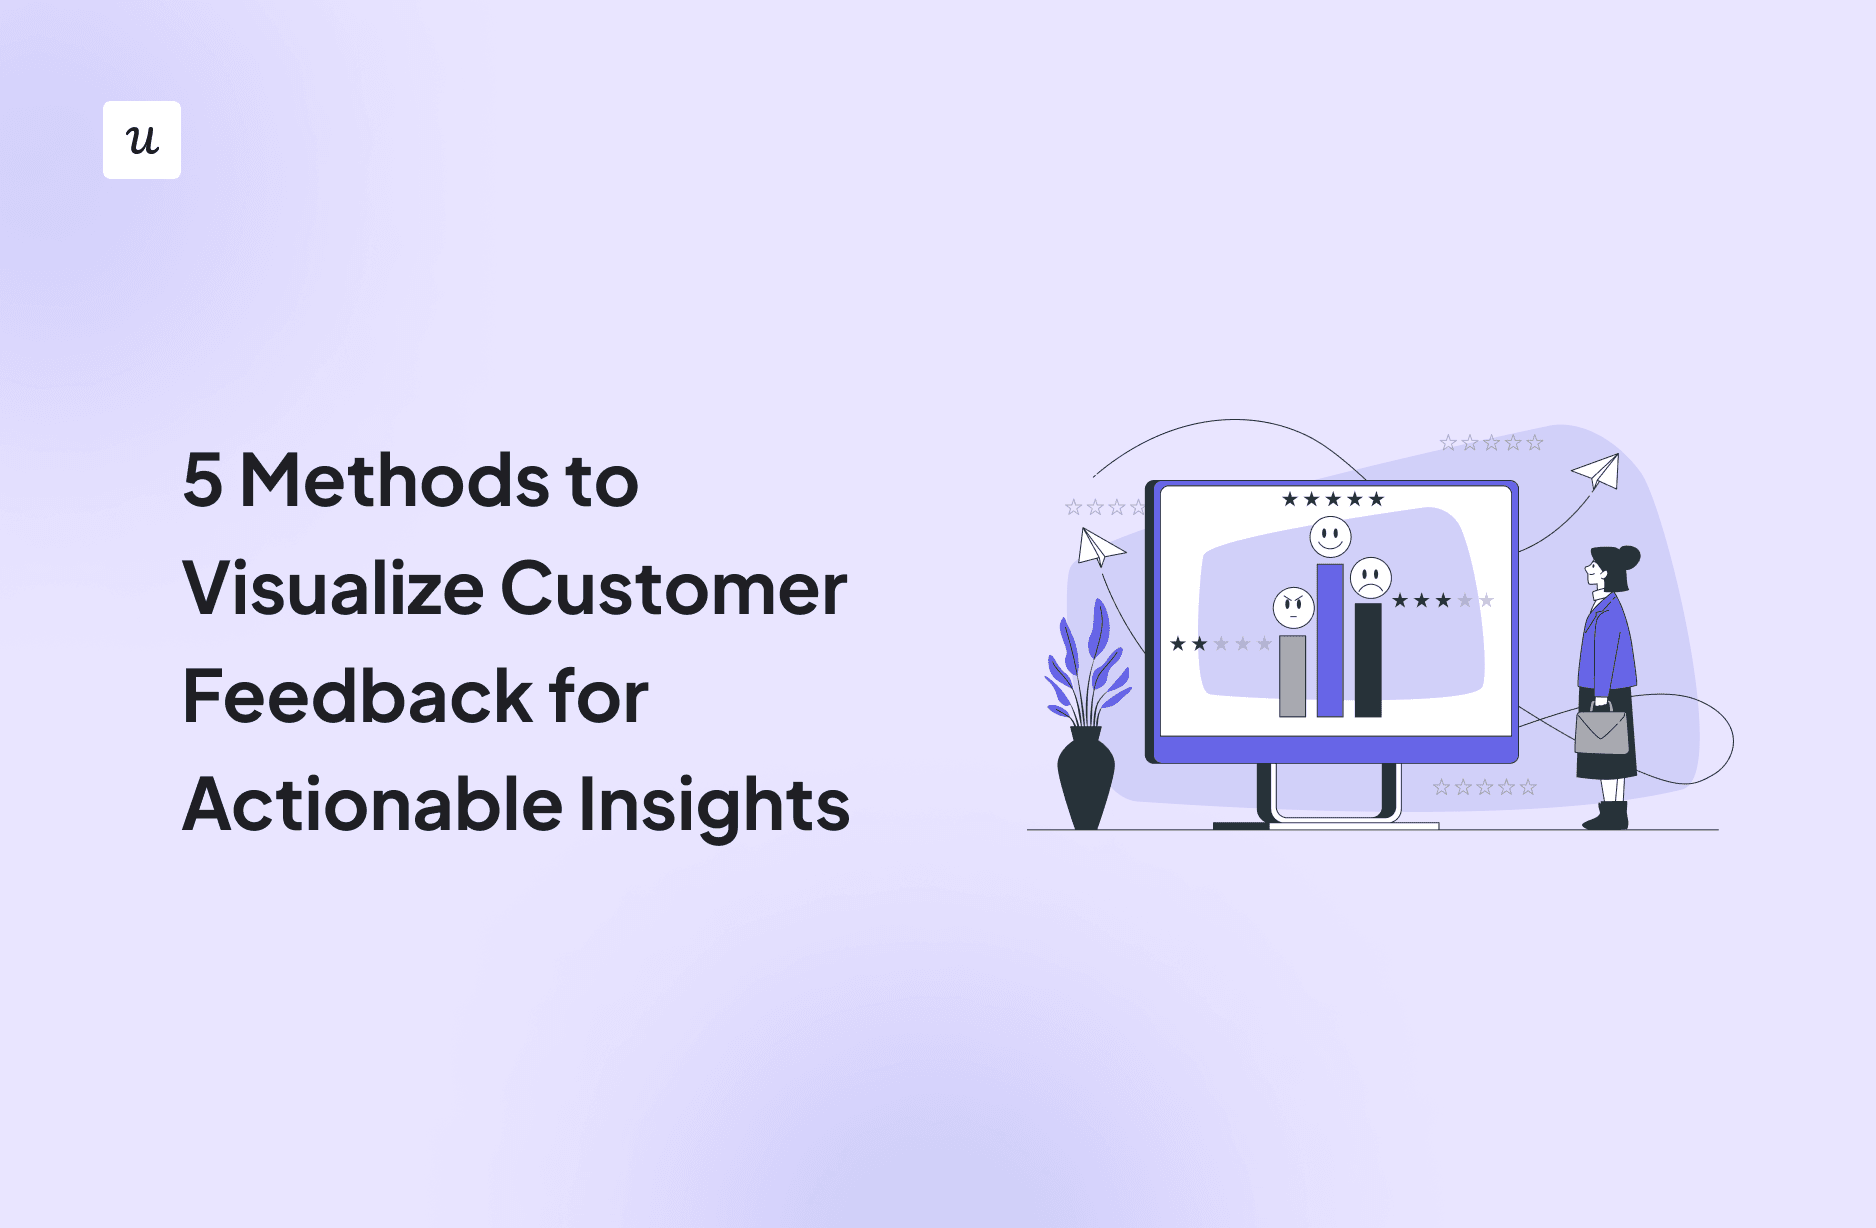 5 Methods to Visualize Customer Feedback for Actionable Insights cover